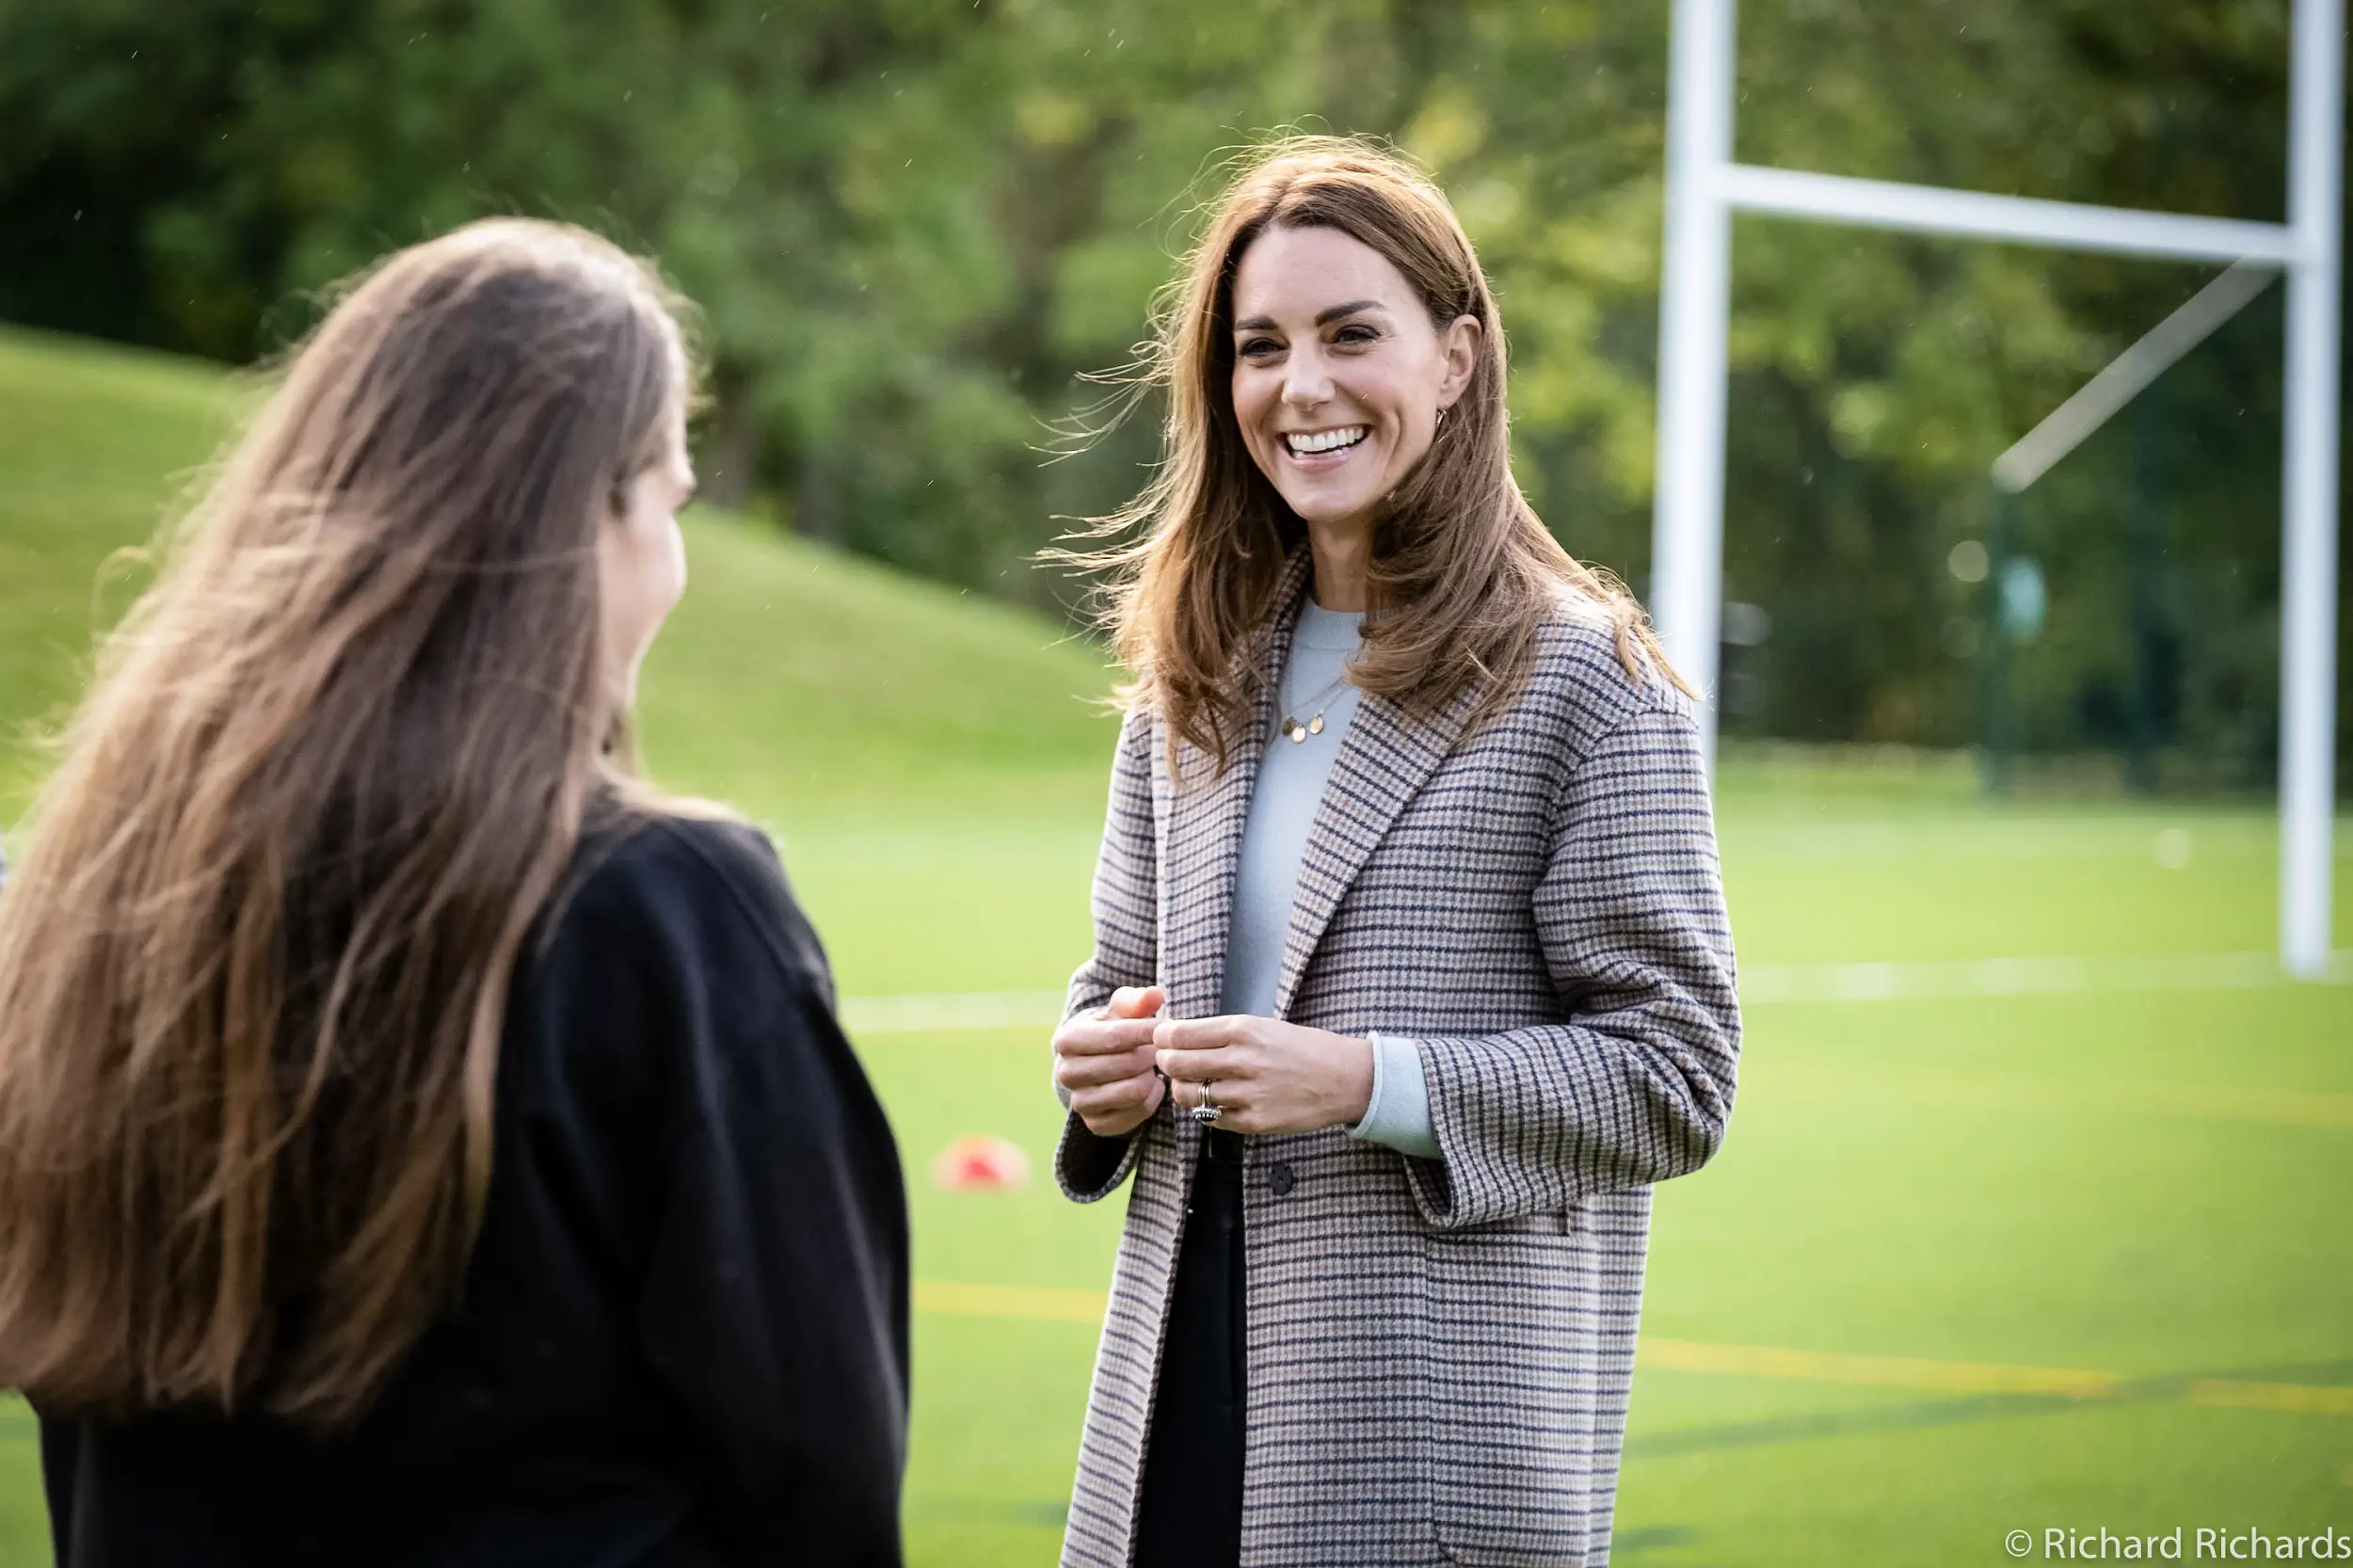 The Duchess of Cambridge wore Massimo Dutti Handcrafted Checked Wool Coat to Derby University